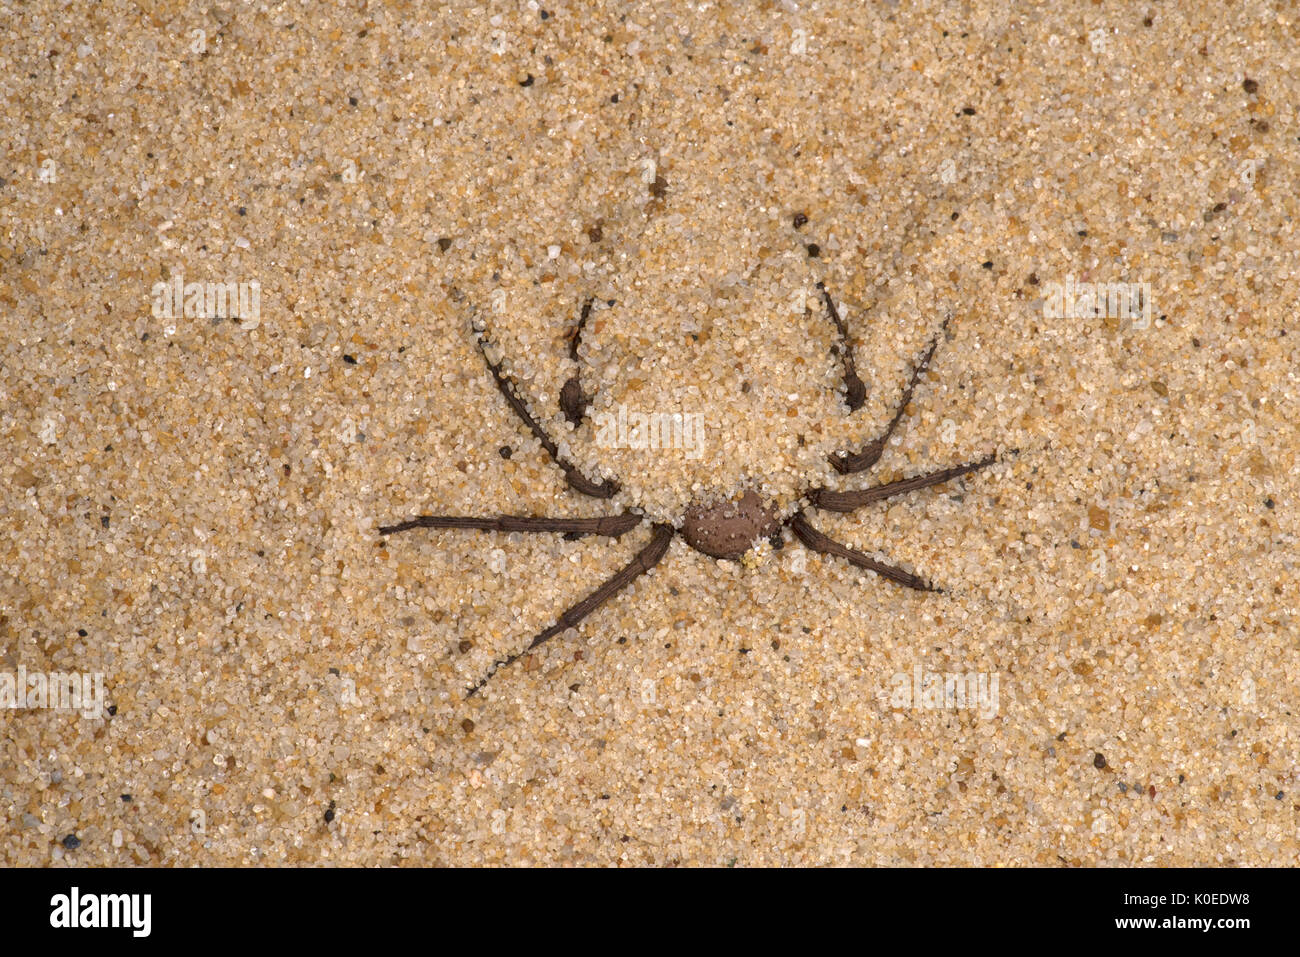 Sand Spider, Sicarius terrosus, Sequence 2 of burying in sand, also called six-eyed sand spider of southern Africa, six eyes arranged in three groups  Stock Photo